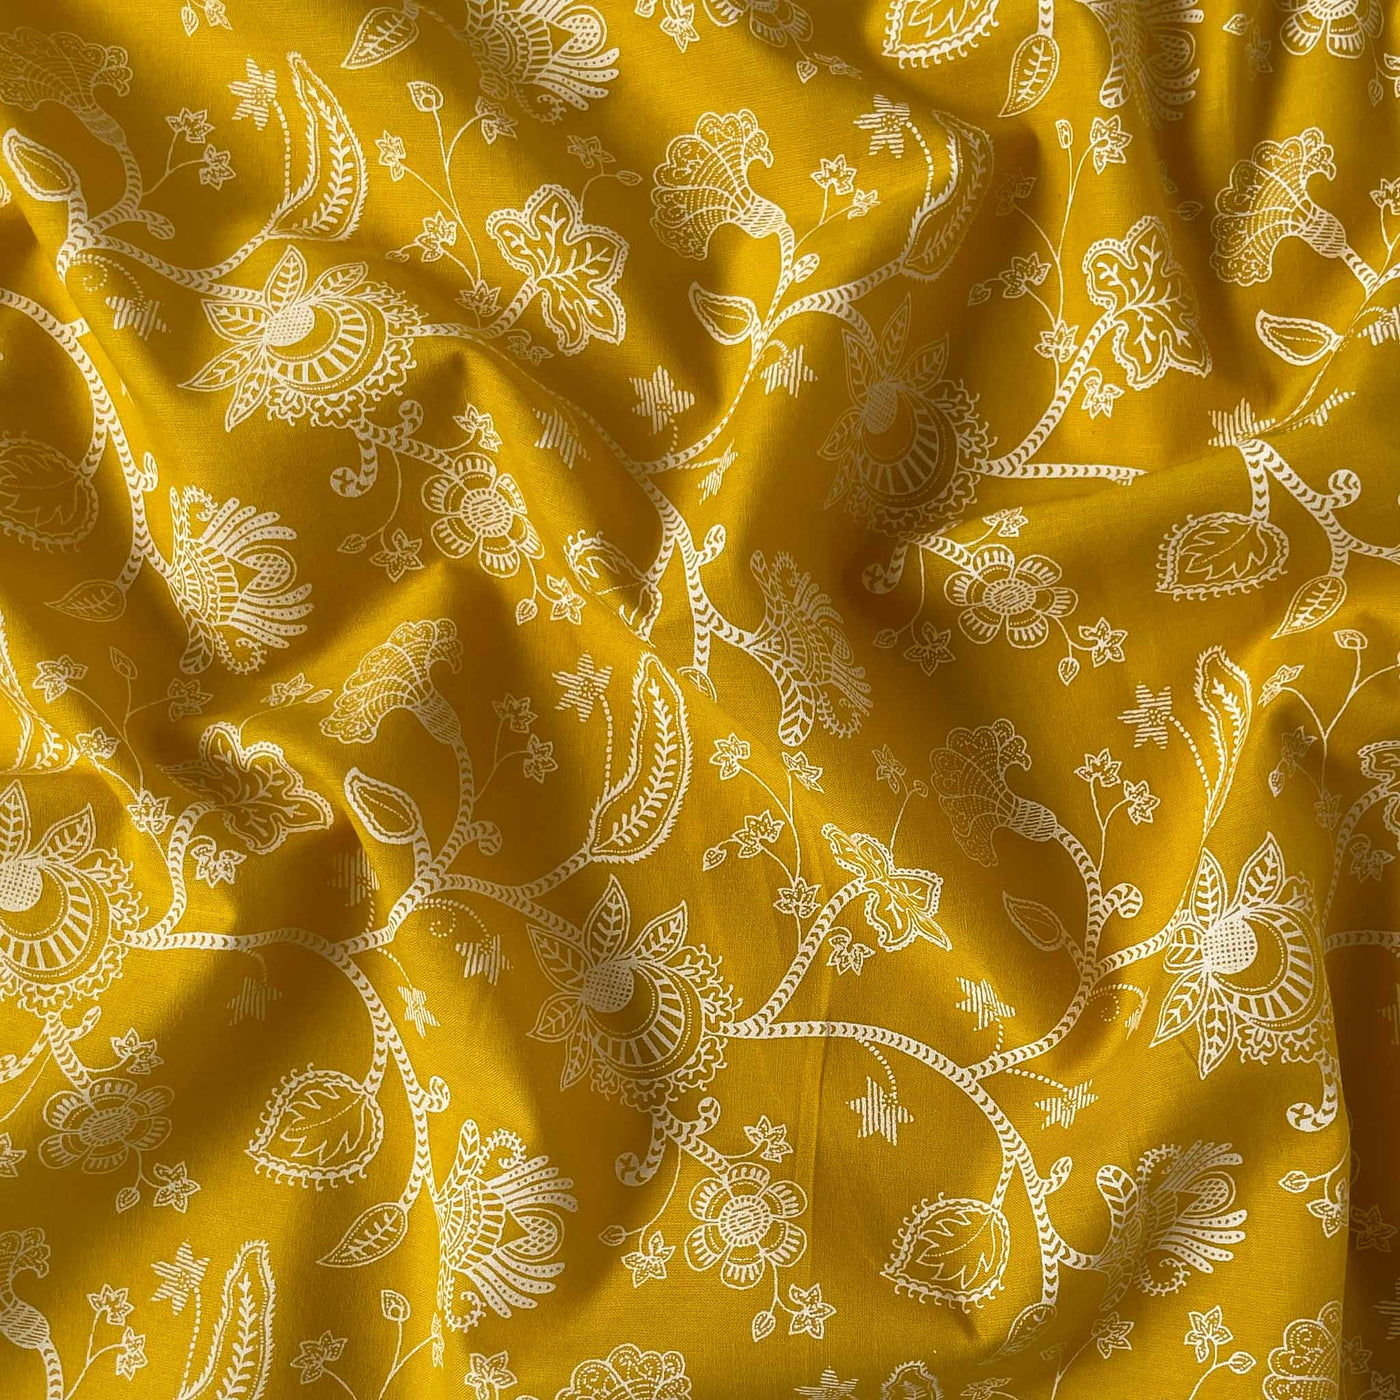 Fabric Pandit Fabric Mustard and White Abstract Floral Vines Hand Block Printed Pure Cotton Fabirc Width (43 inches)